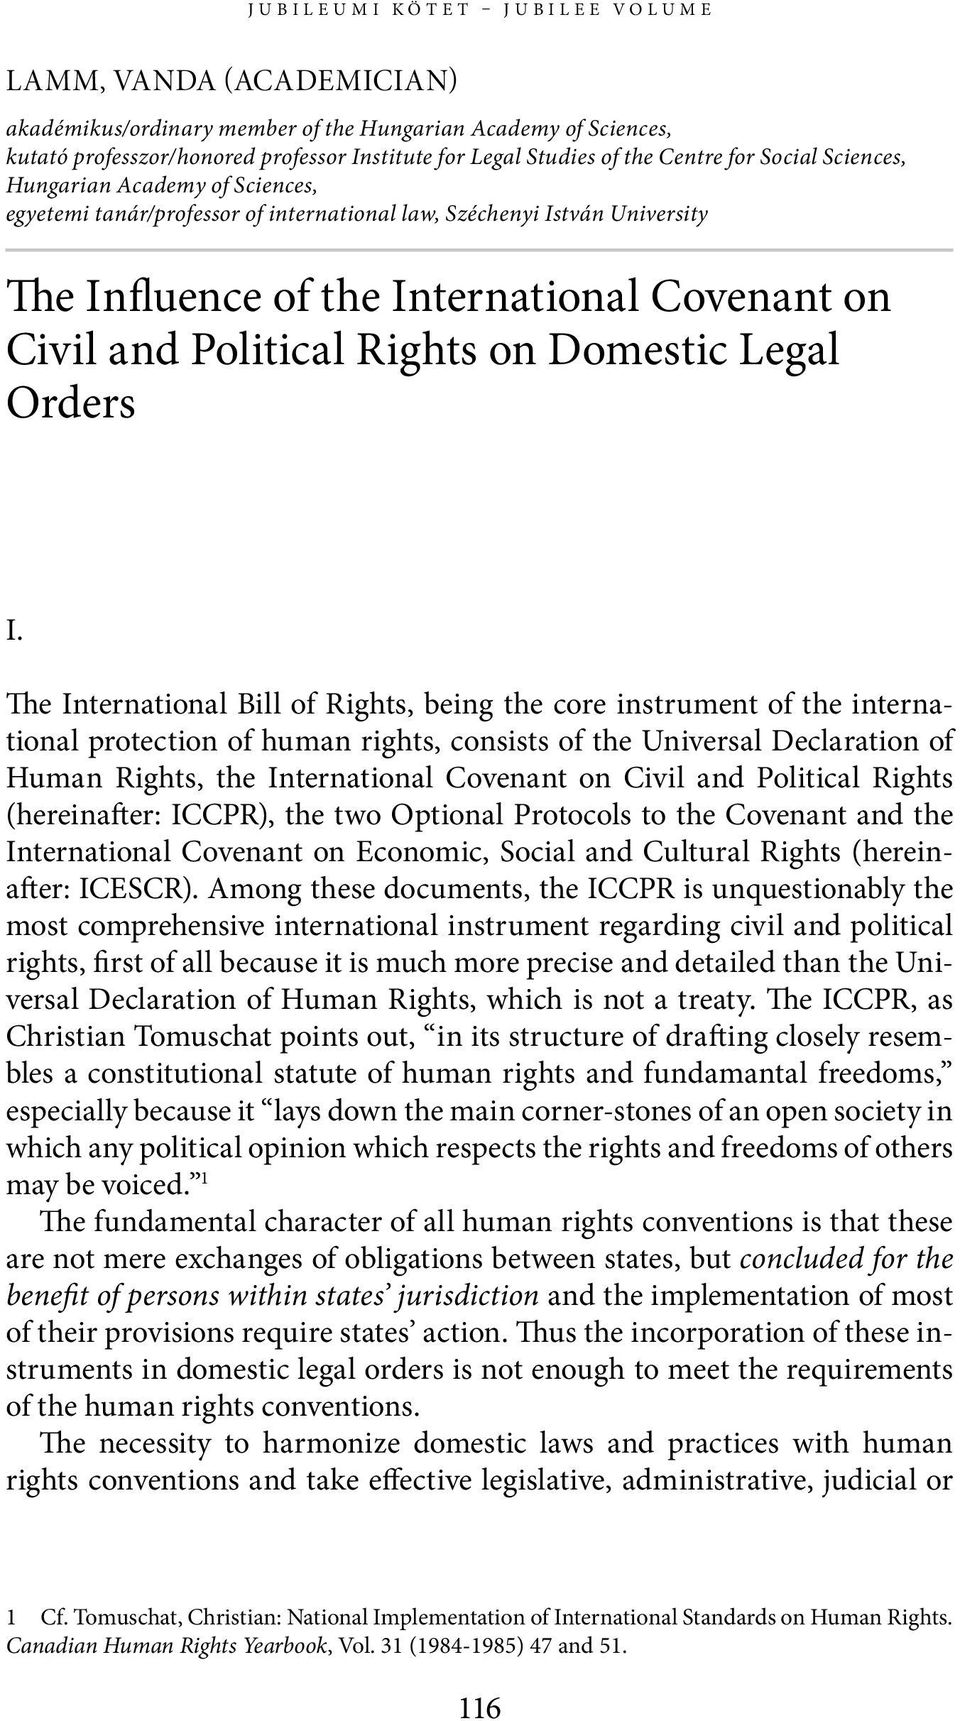 The International Bill of Rights, being the core instrument of the international protection of human rights, consists of the Universal Declaration of Human Rights, the International Covenant on Civil